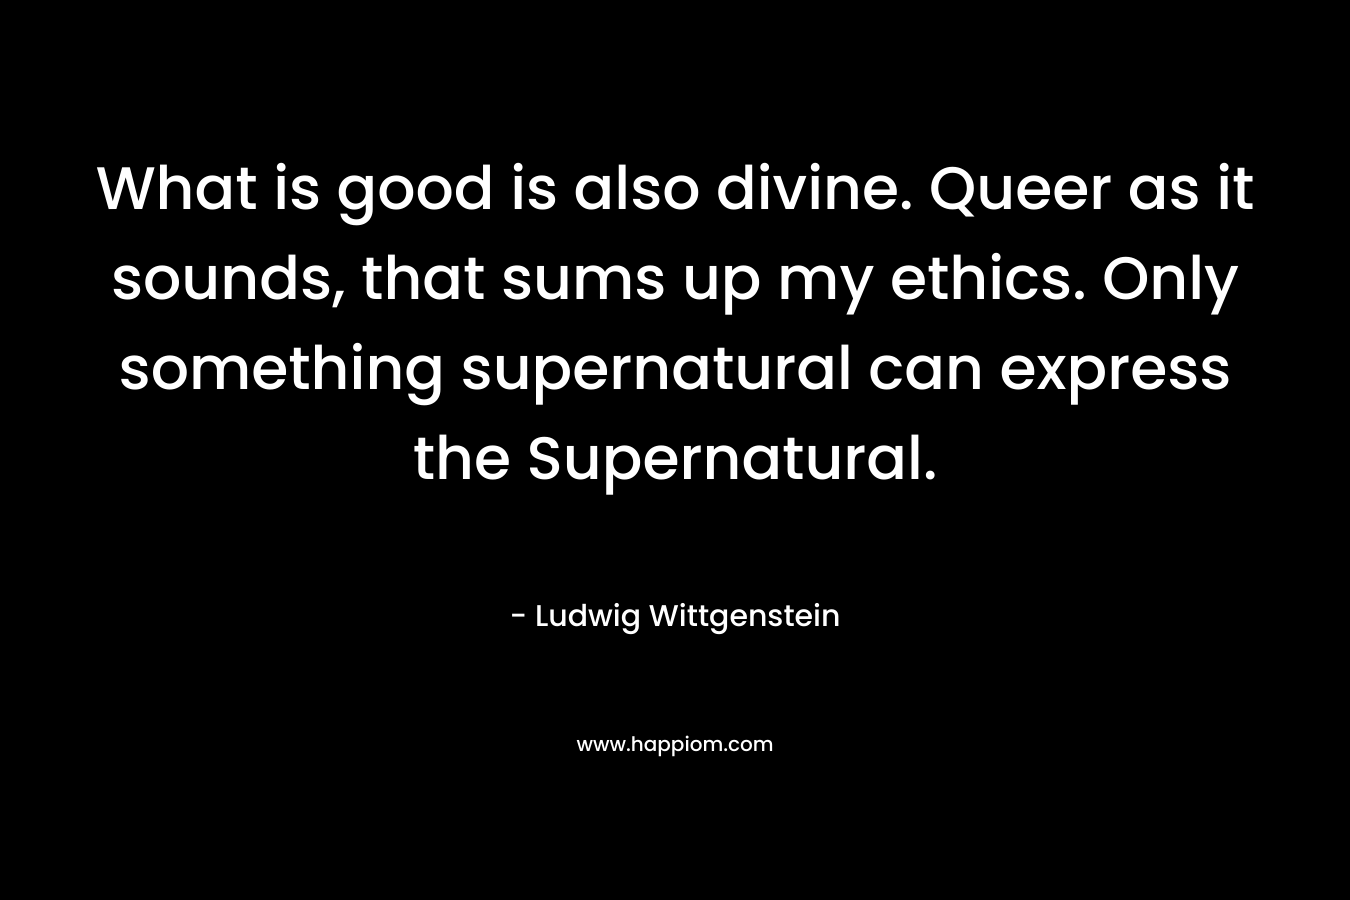 What is good is also divine. Queer as it sounds, that sums up my ethics. Only something supernatural can express the Supernatural. – Ludwig Wittgenstein